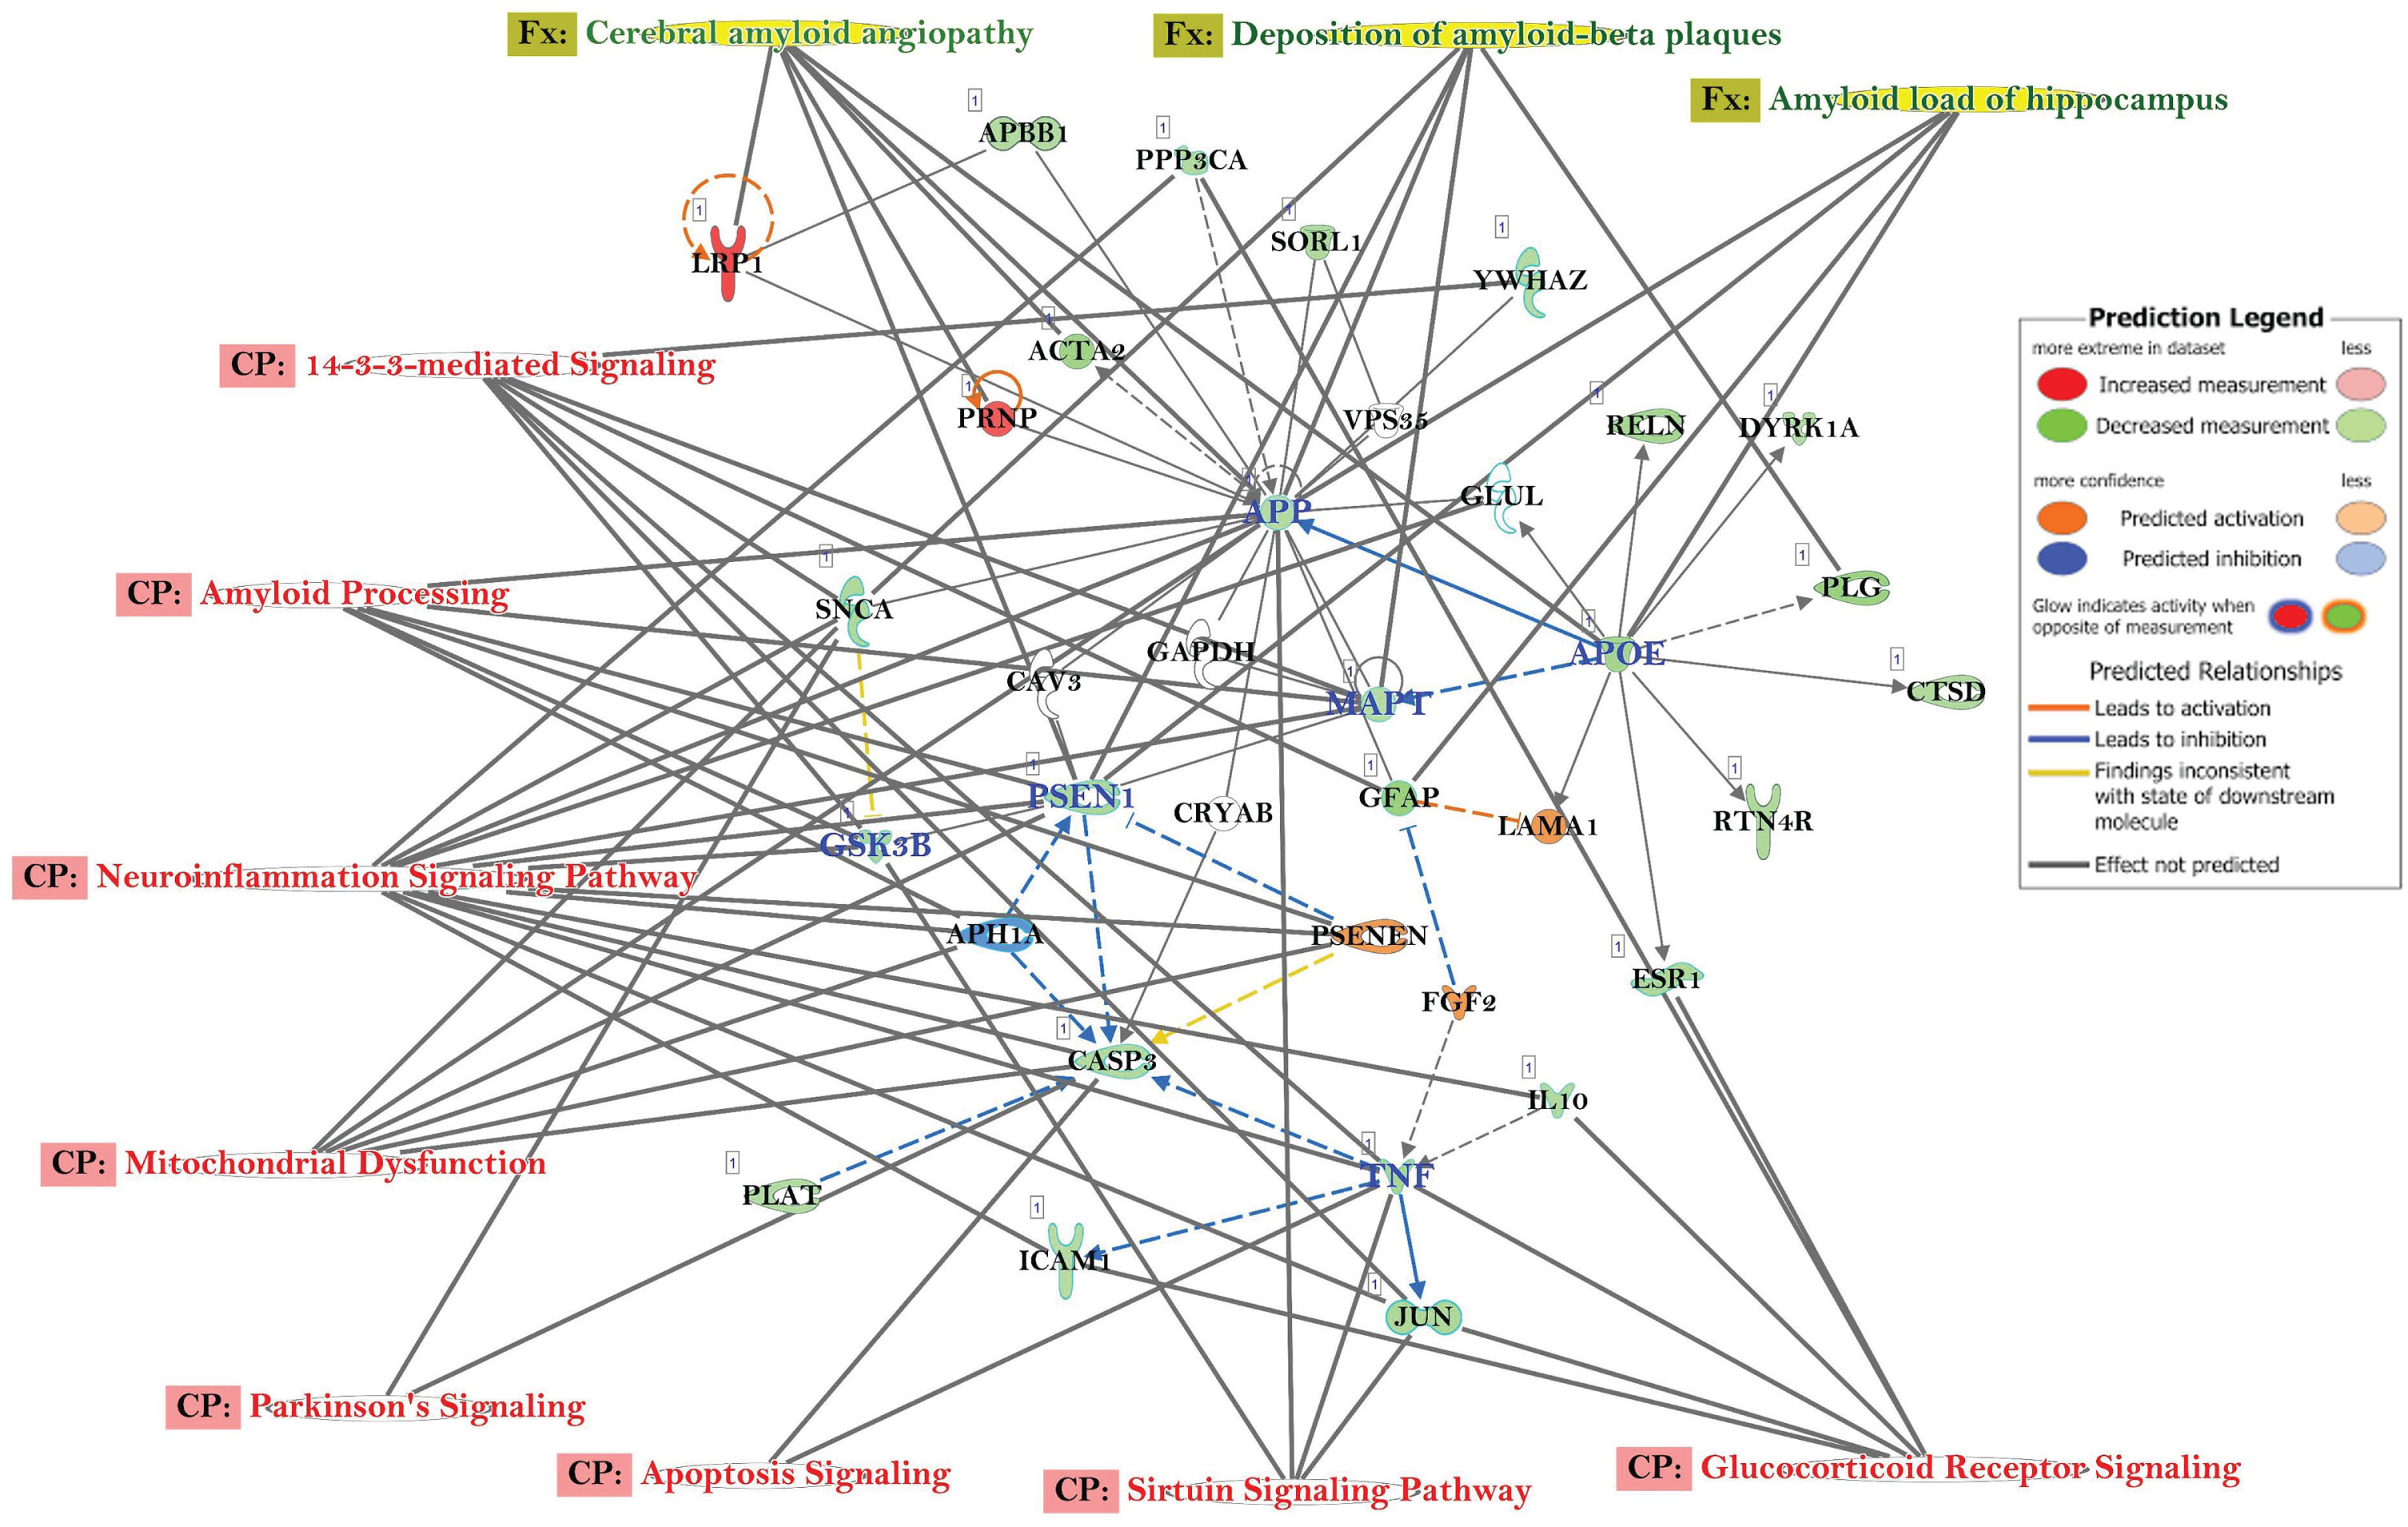 Network of differentially expressed genes in the important signaling pathways in the AD participants, relative to healthy control subjects. Connections between differentially expressed genes were processed for those with≥2-fold change, t-test, p < 0.05. Geometric figures in red denote upregulated genes, and those that are green indicate downregulation. Canonical pathways for signaling that are highly represented are shown within the box. Genes in uncolored notes were integrated into computational generated networks based on evidence stored in the IPA knowledge base.